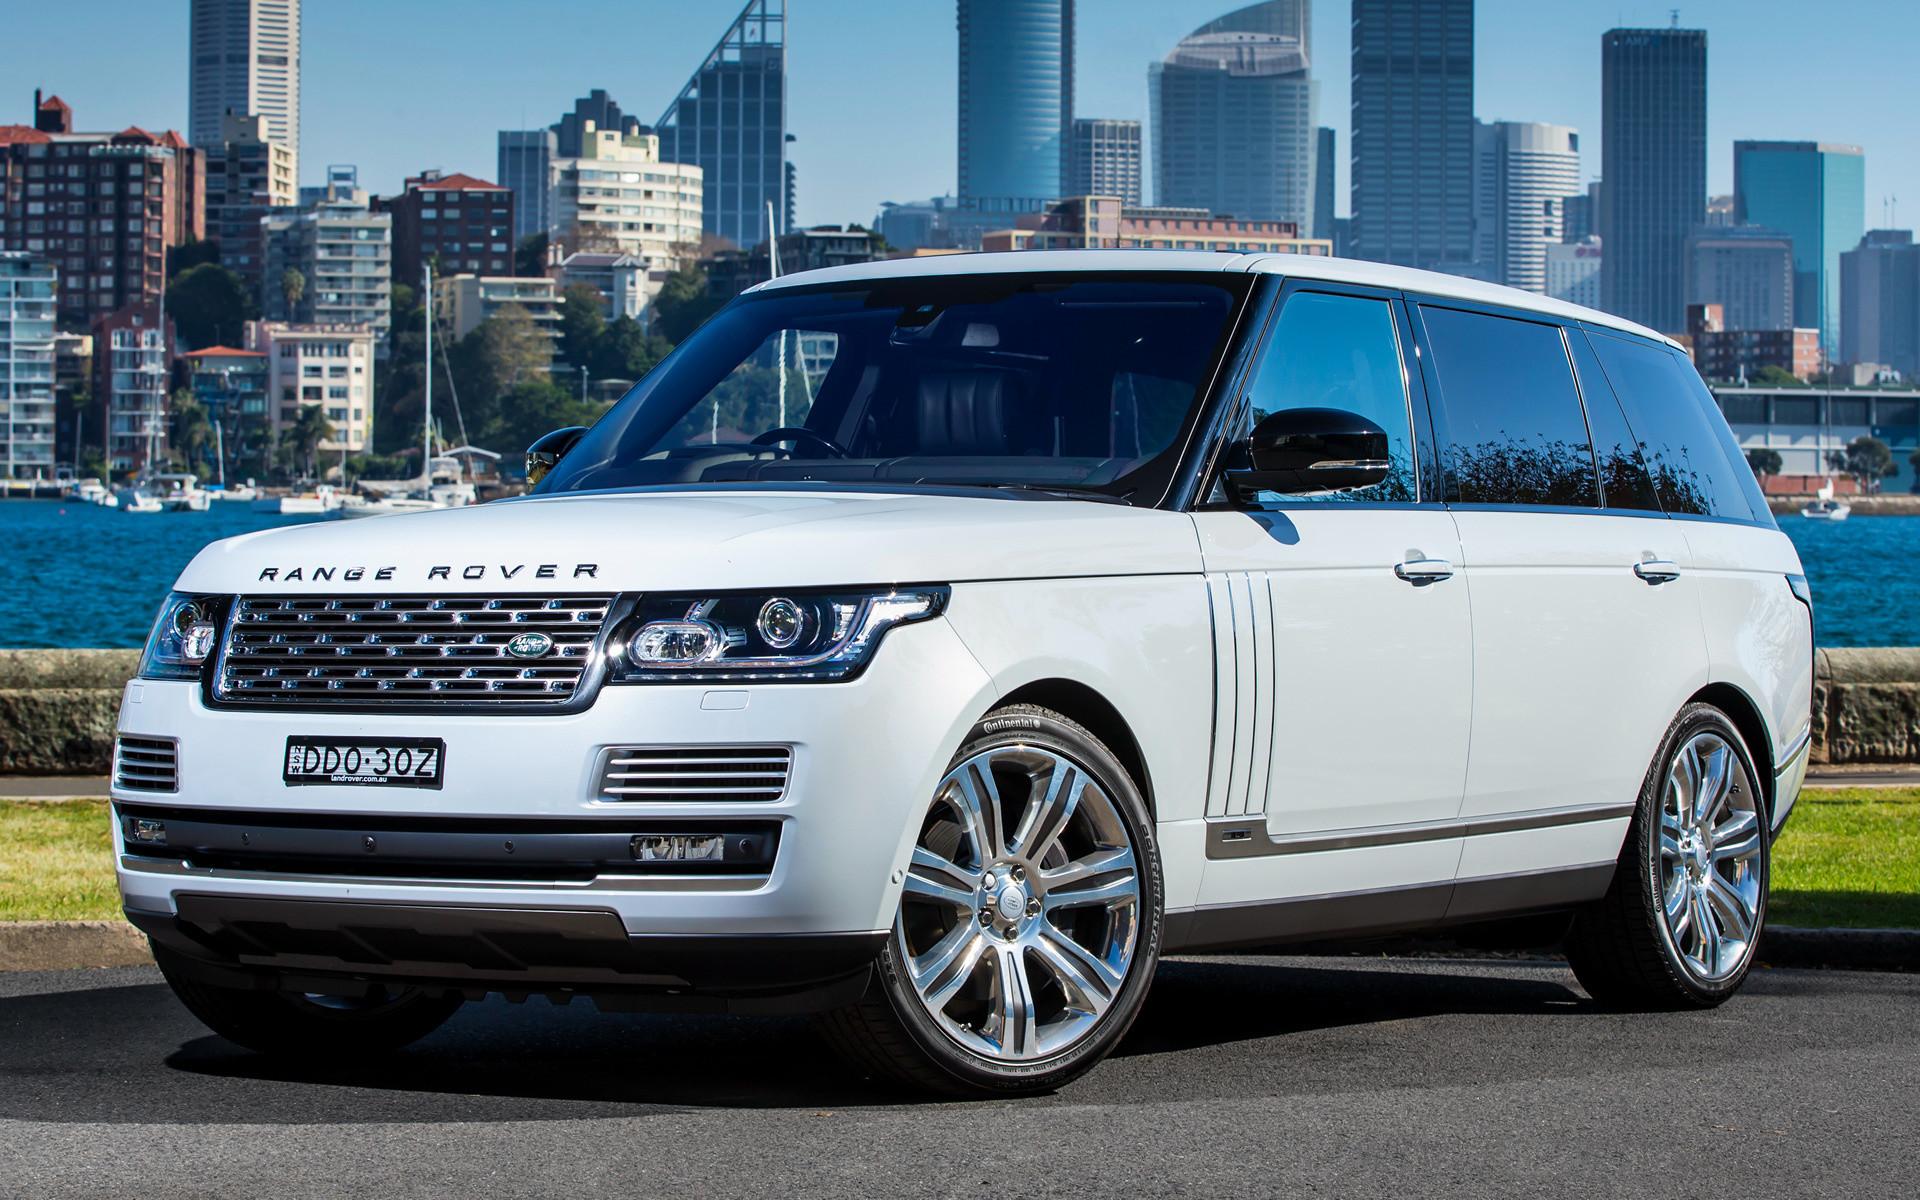 Range Rover Wallpaper background picture